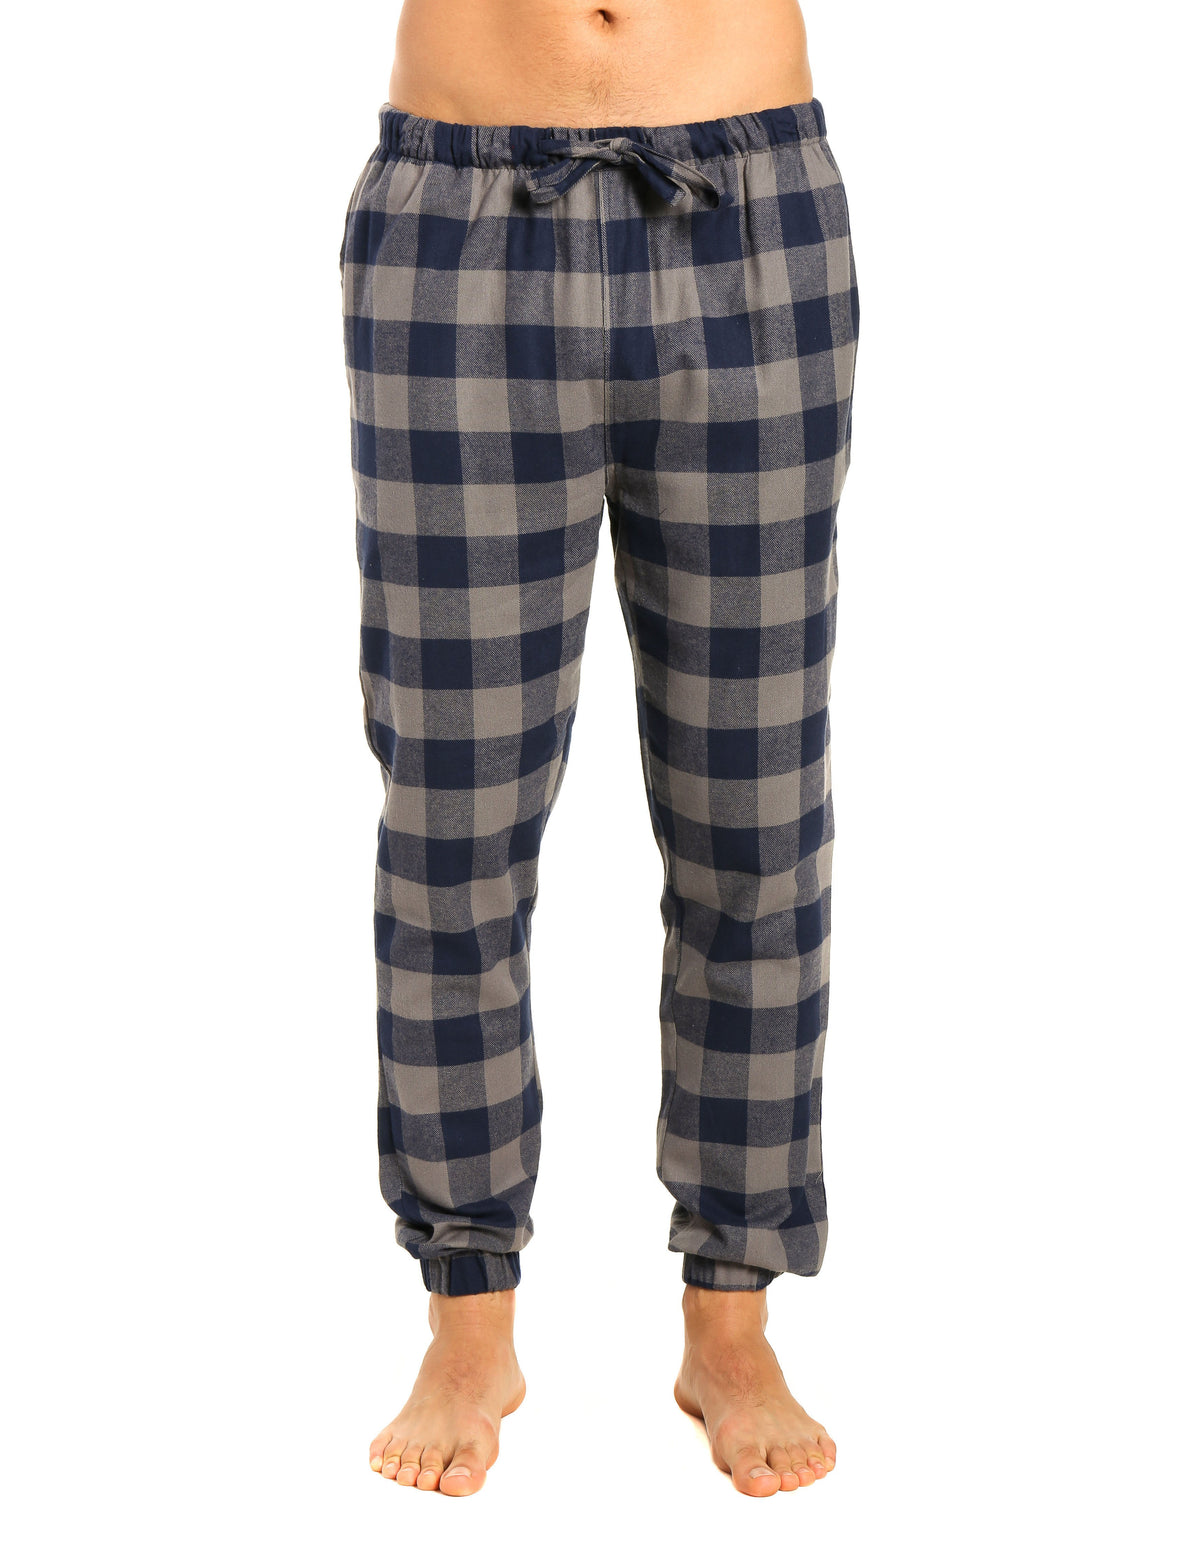 Mens 100% Cotton Flannel Jogger Lounge Pants - Gingham Checks - Charcoal-Navy